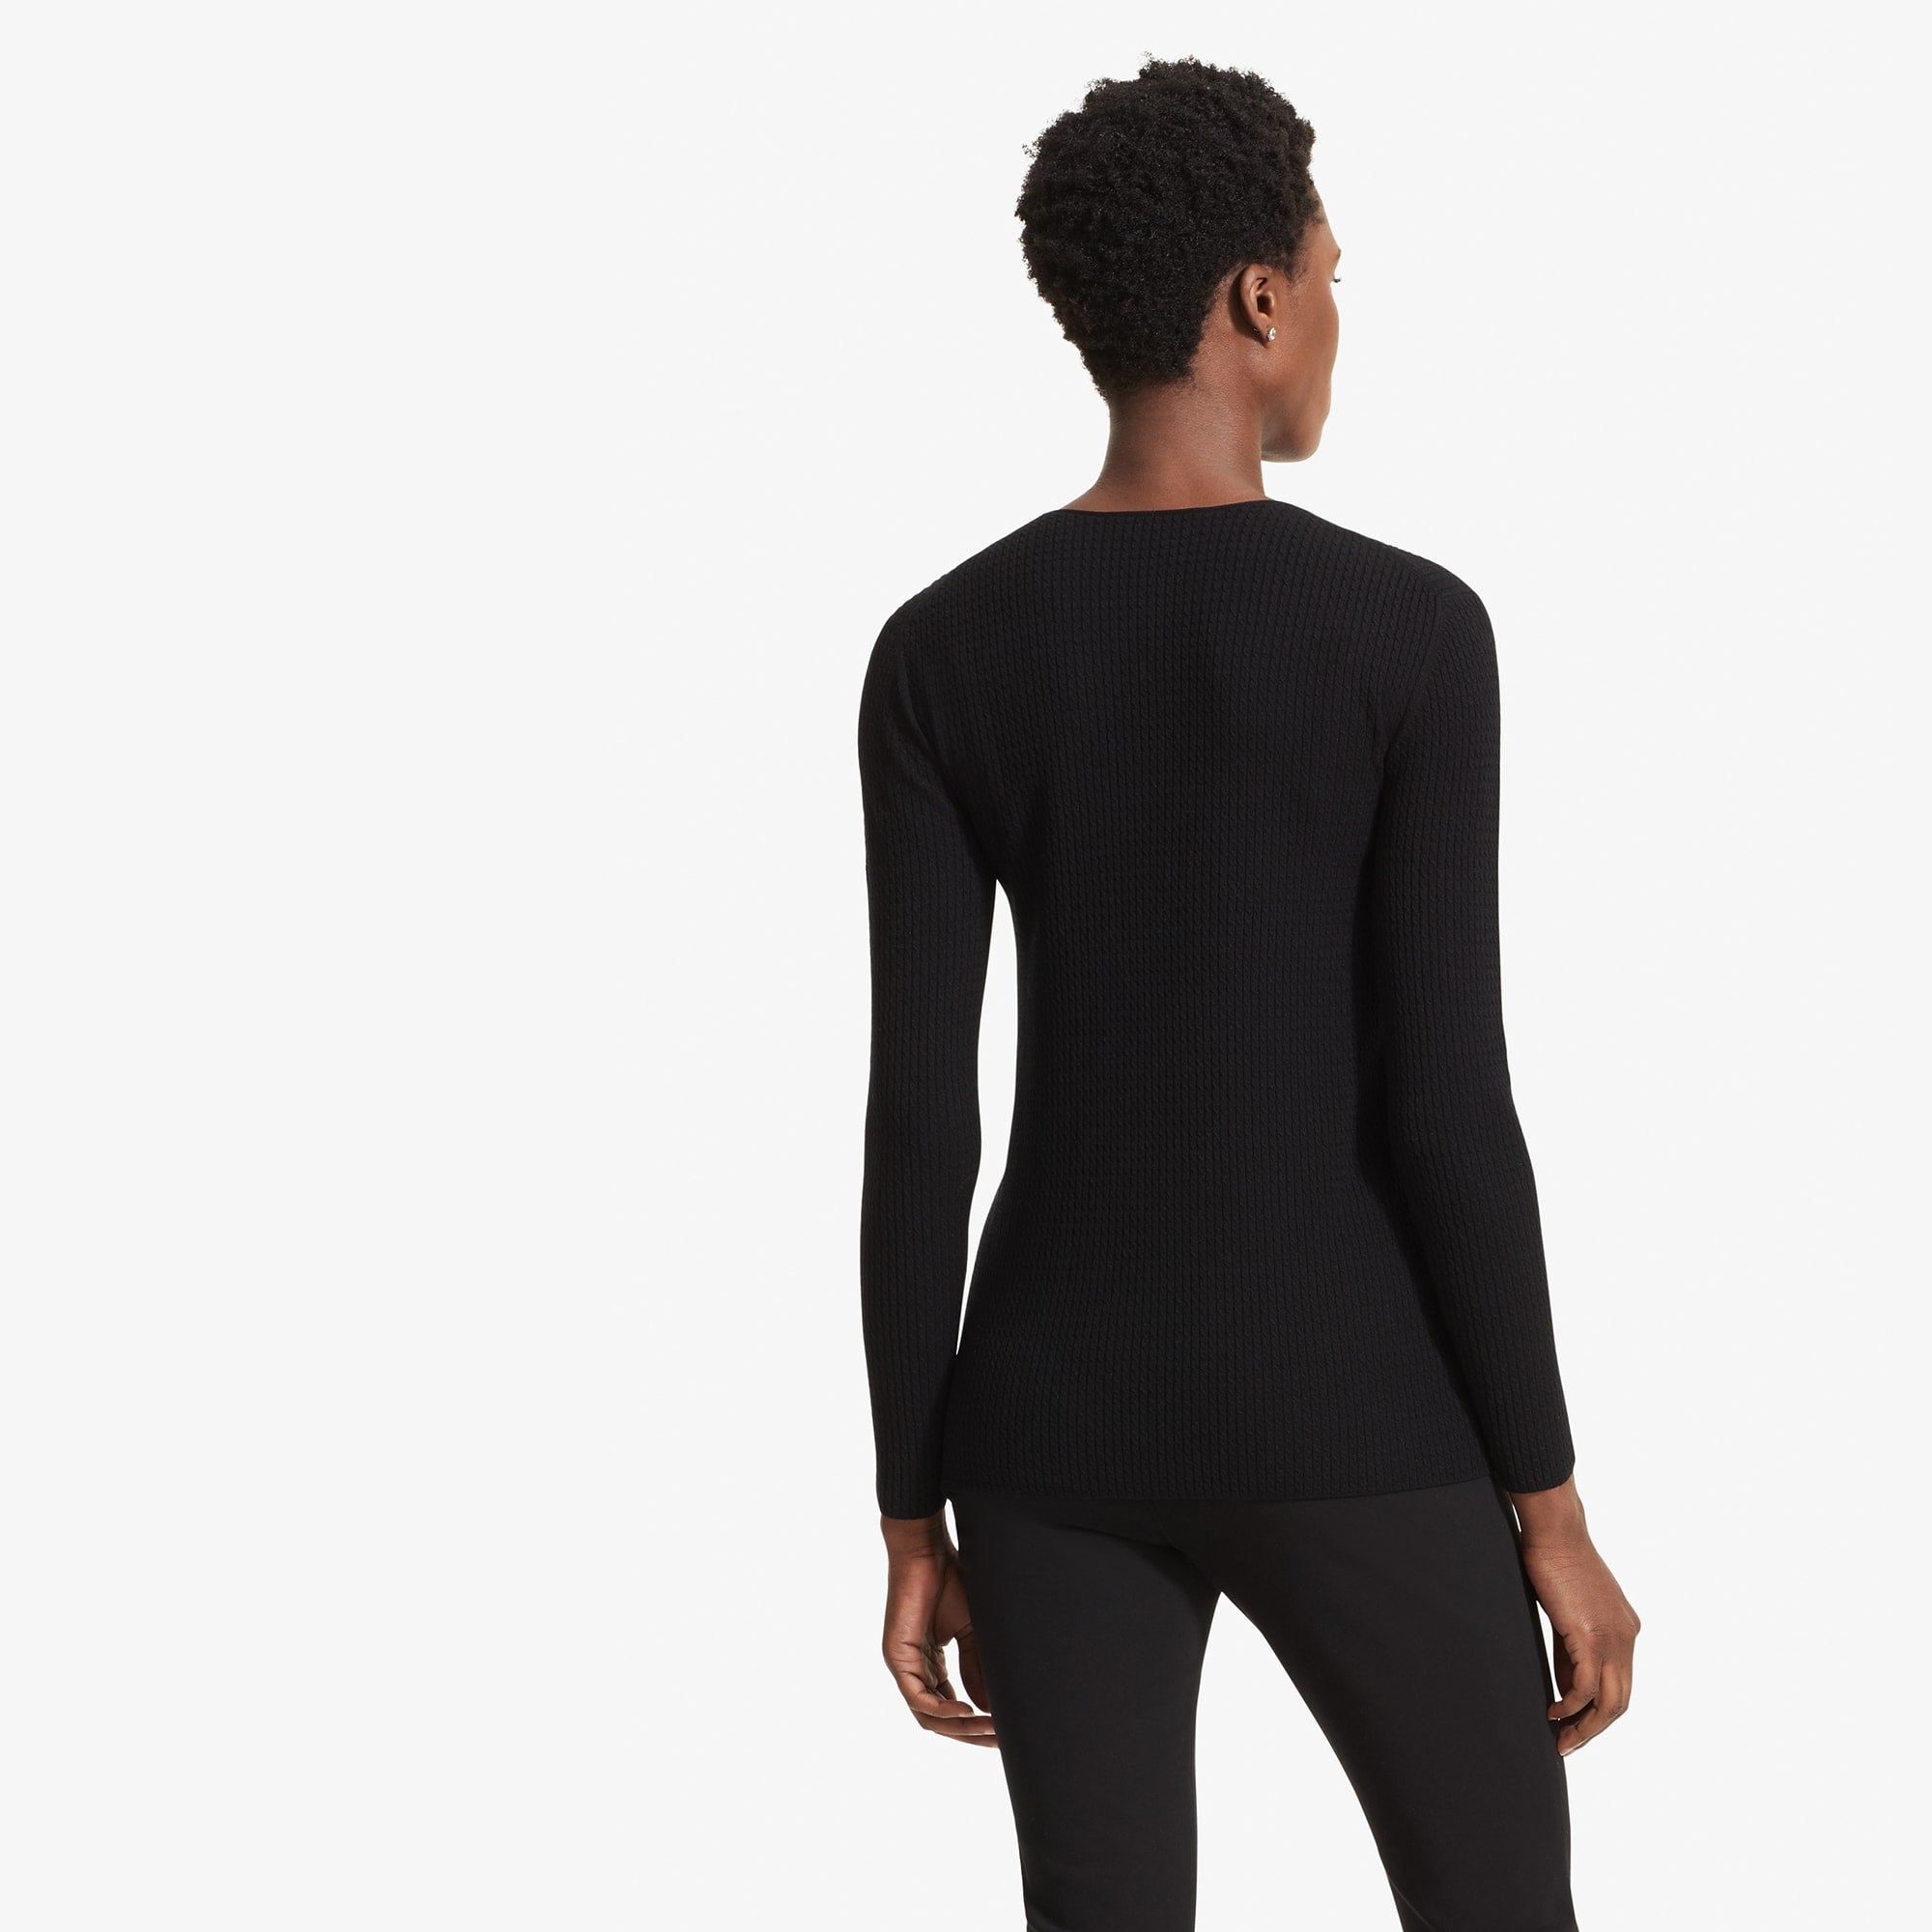 Back image of a woman standing wearing the Loraine top in Black